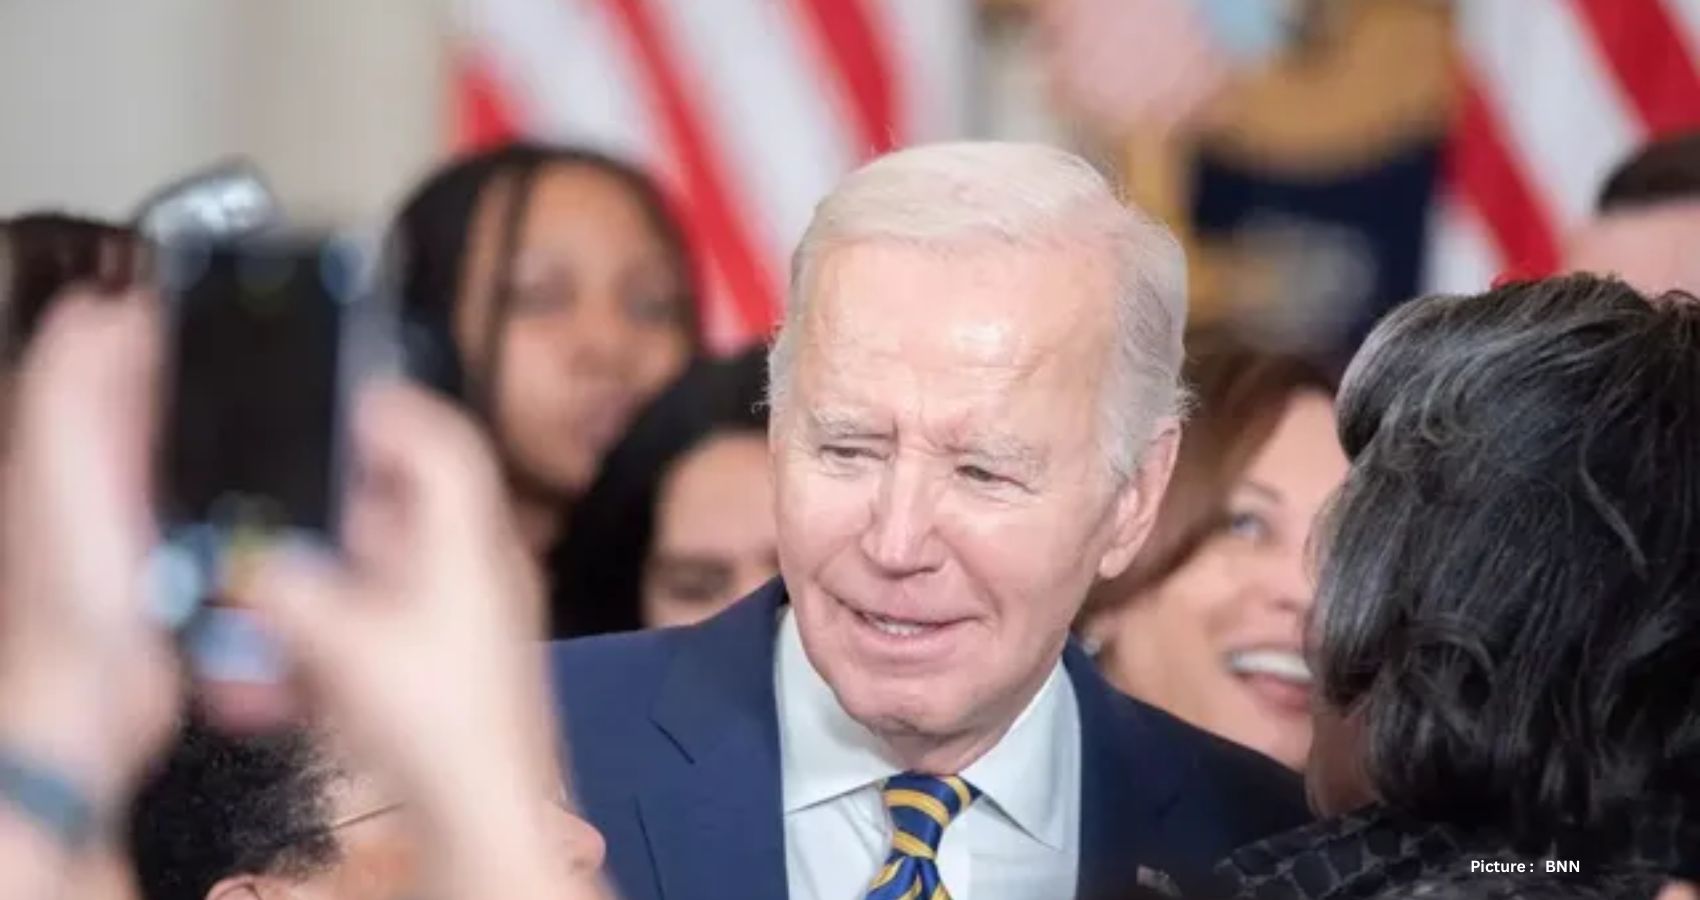 Debate Ignites Over Biden’s Fitness for Office Amid Handling of Classified Documents and Age Concerns